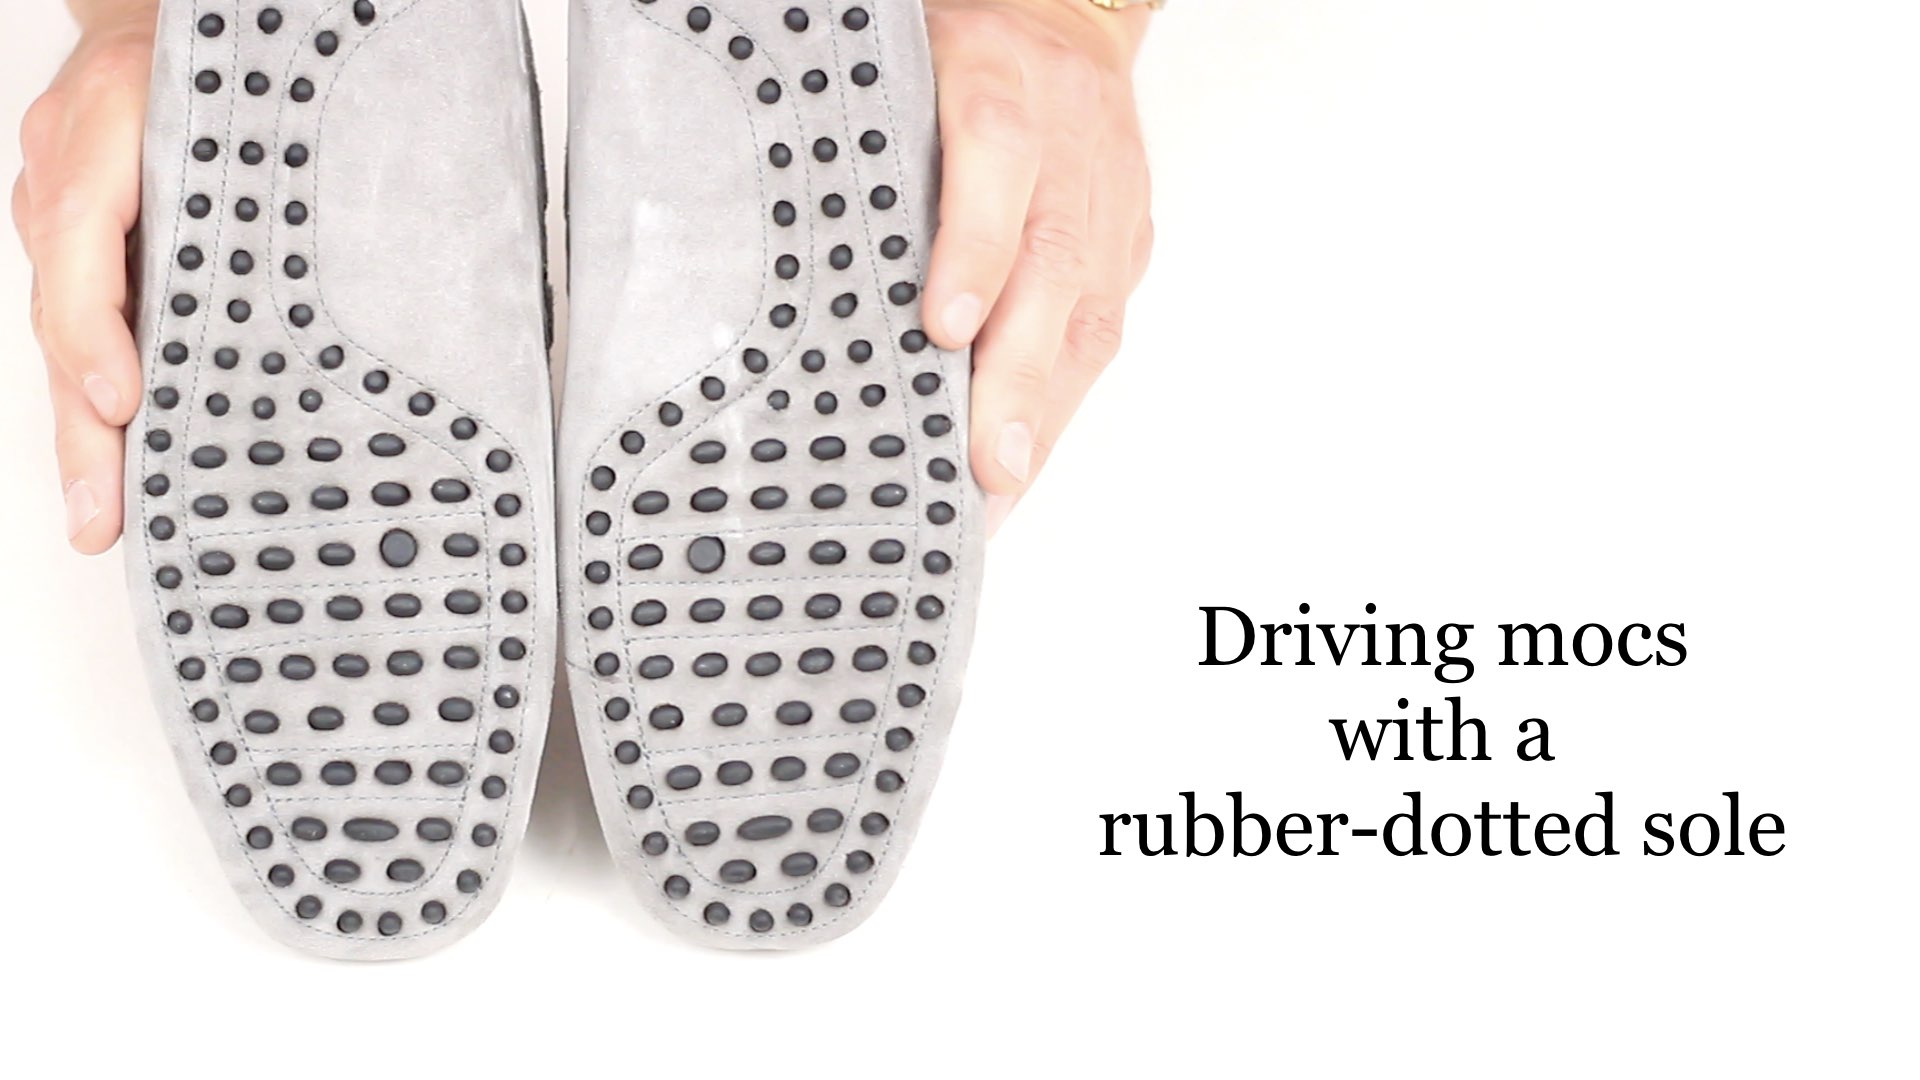 049 Rubber-dotted sole on driving mocs